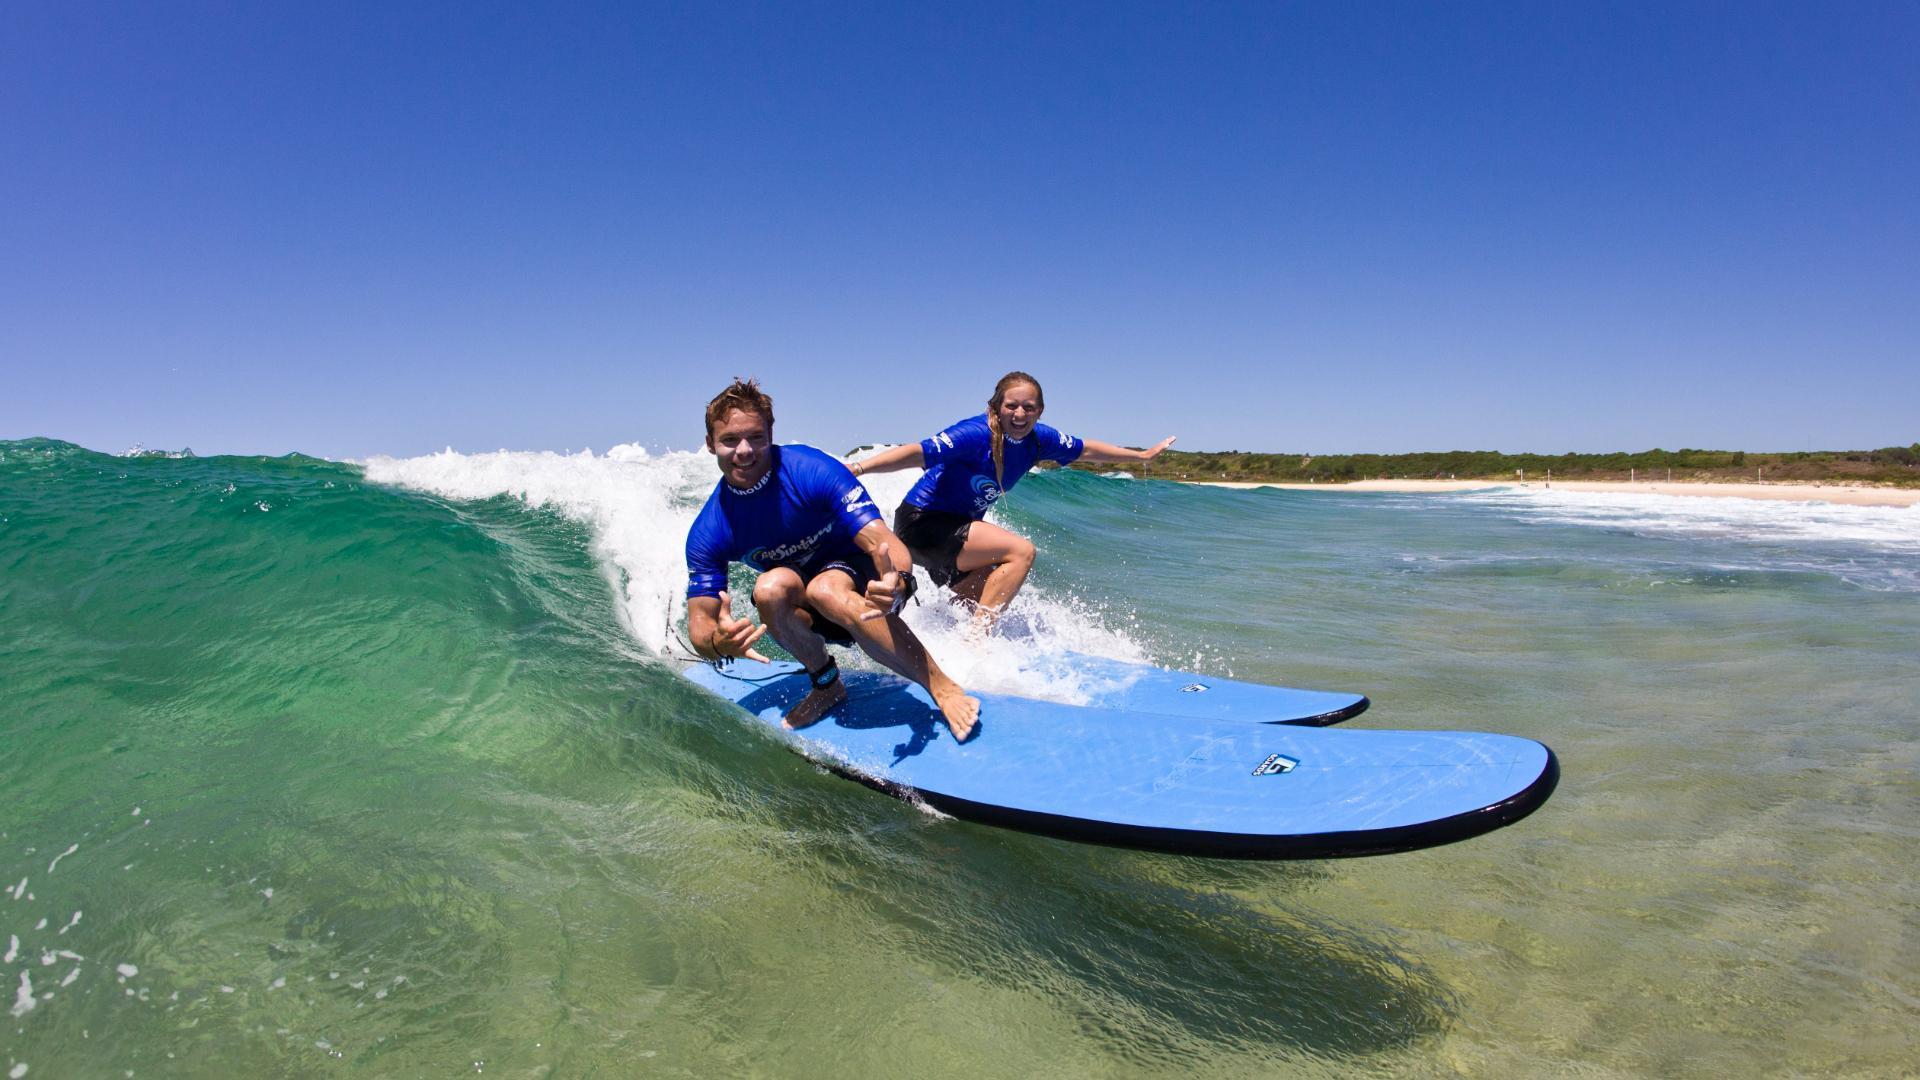 Book Surfing Lessons in Maroubra for Teens & Adults with Let's Go Surfing...